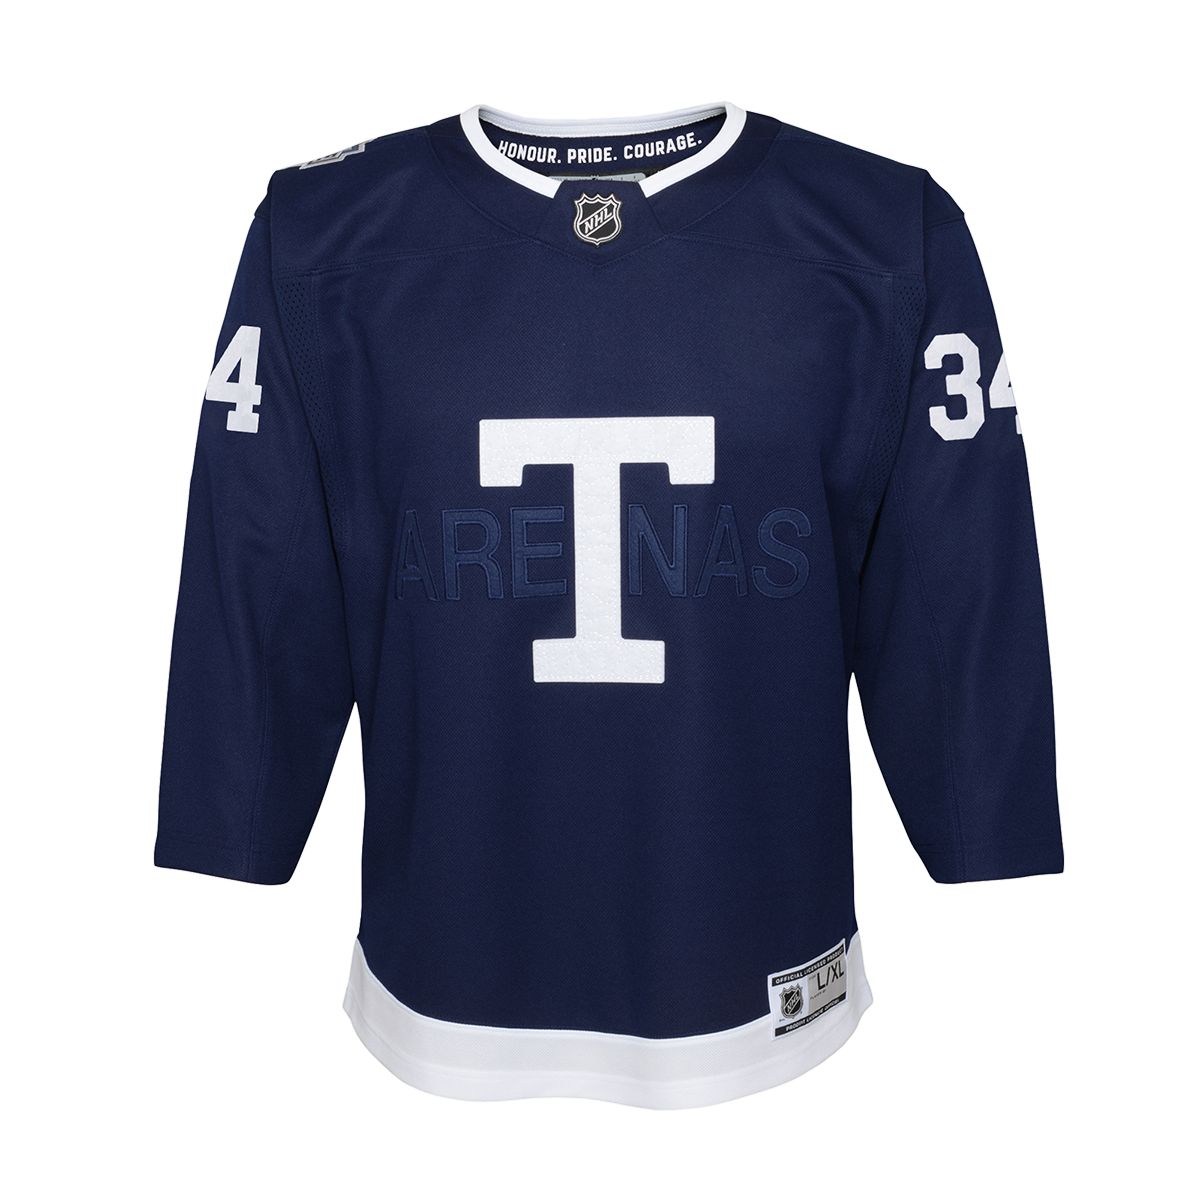 Leafs Heritage Classic Jersey : r/hockey